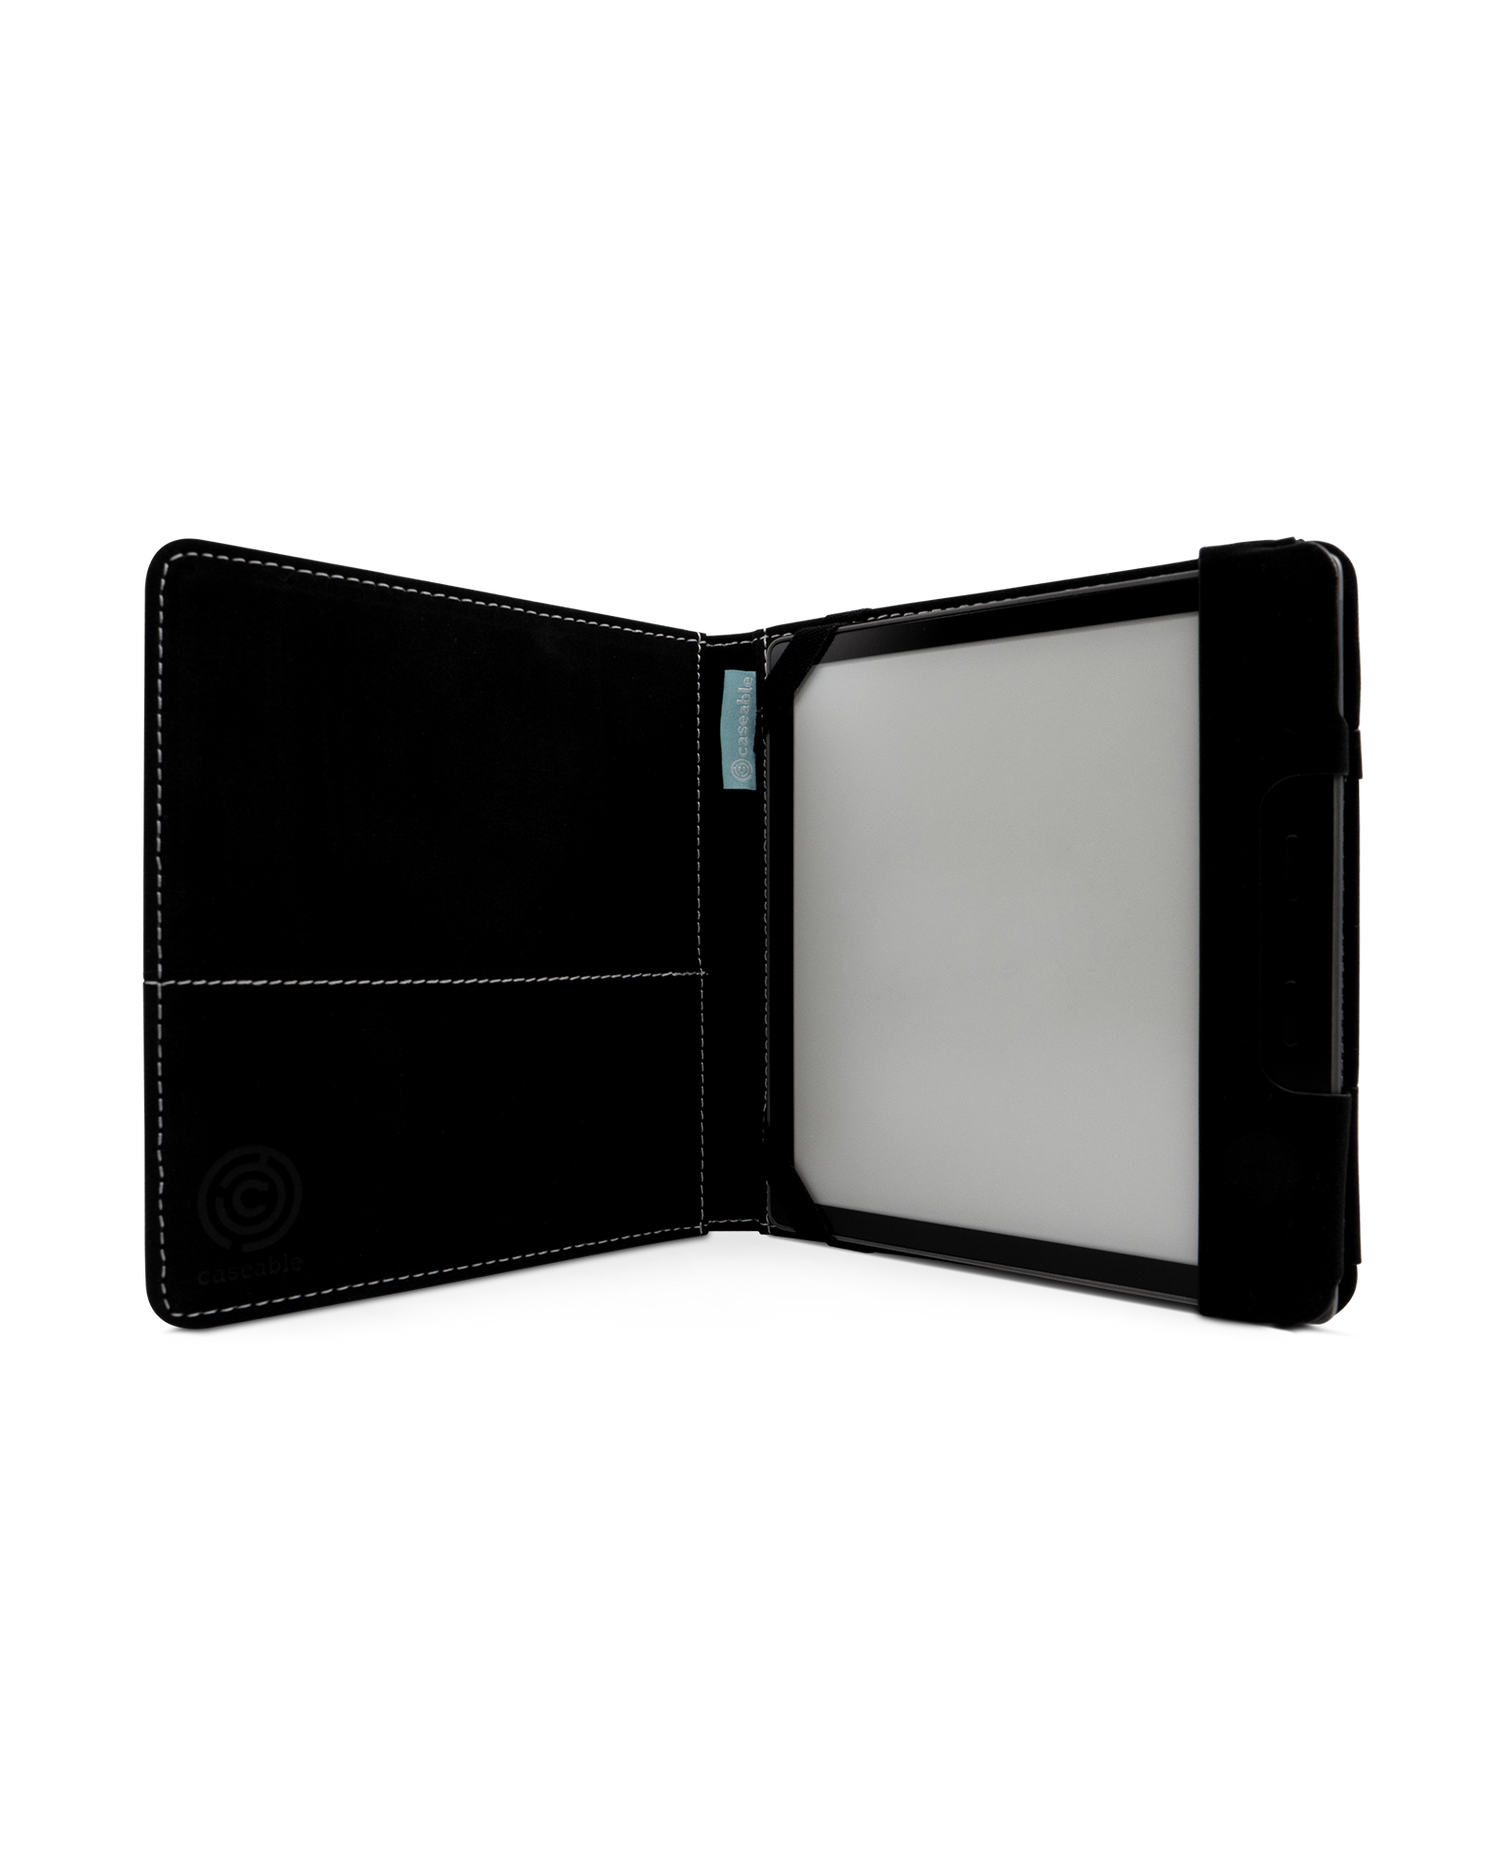 Starry Night Sky eReader Case for tolino vision 6: Opened interior view